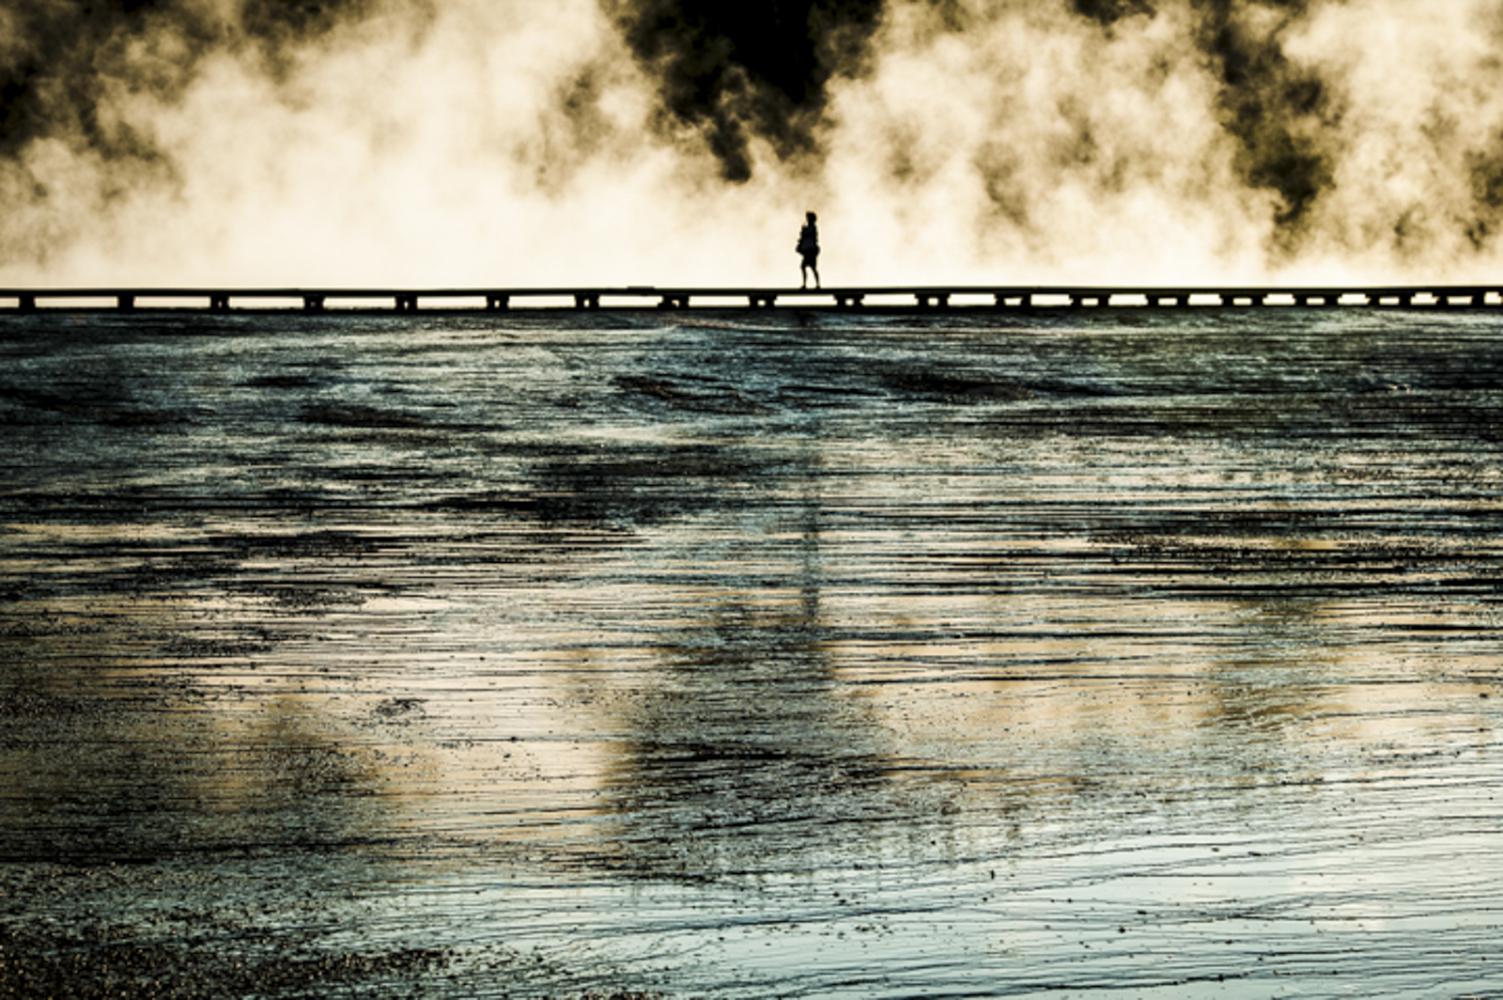 A women walks on a plank overlooking a geyser in Yellowstone National Park, California.